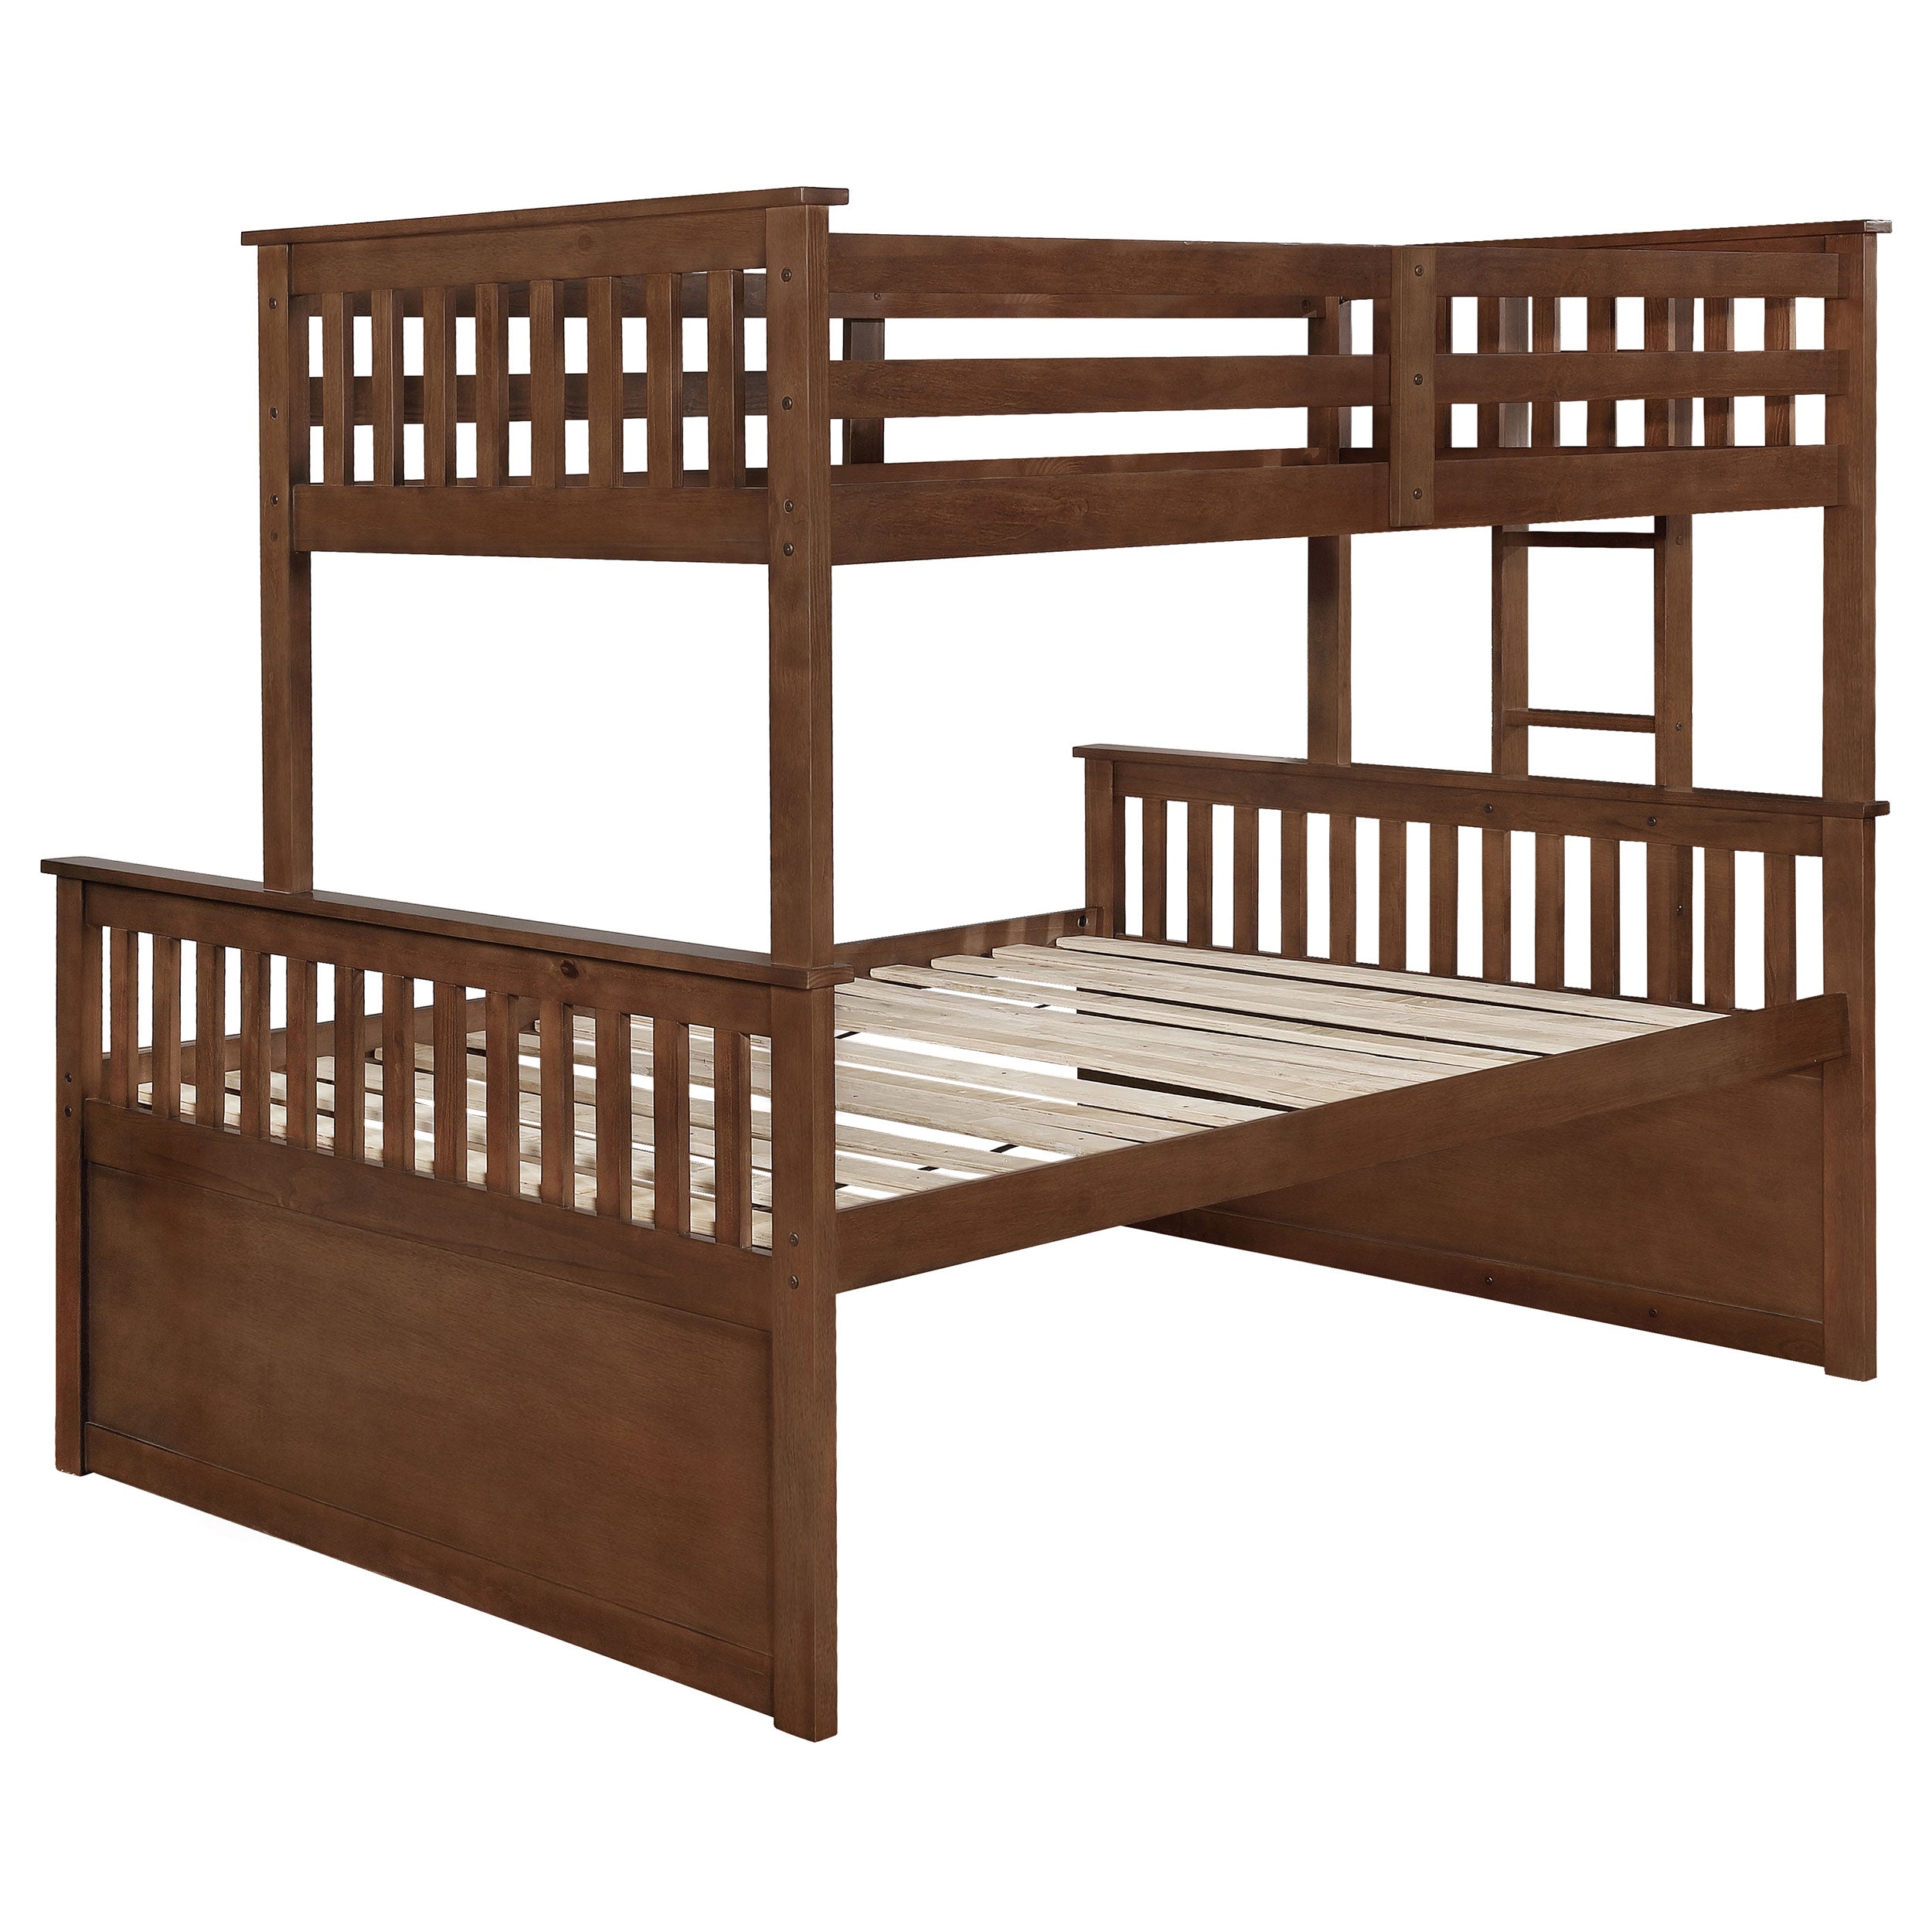 Atkin Twin Extra Long over Queen 3-drawer Bunk Bed Weathered Walnut